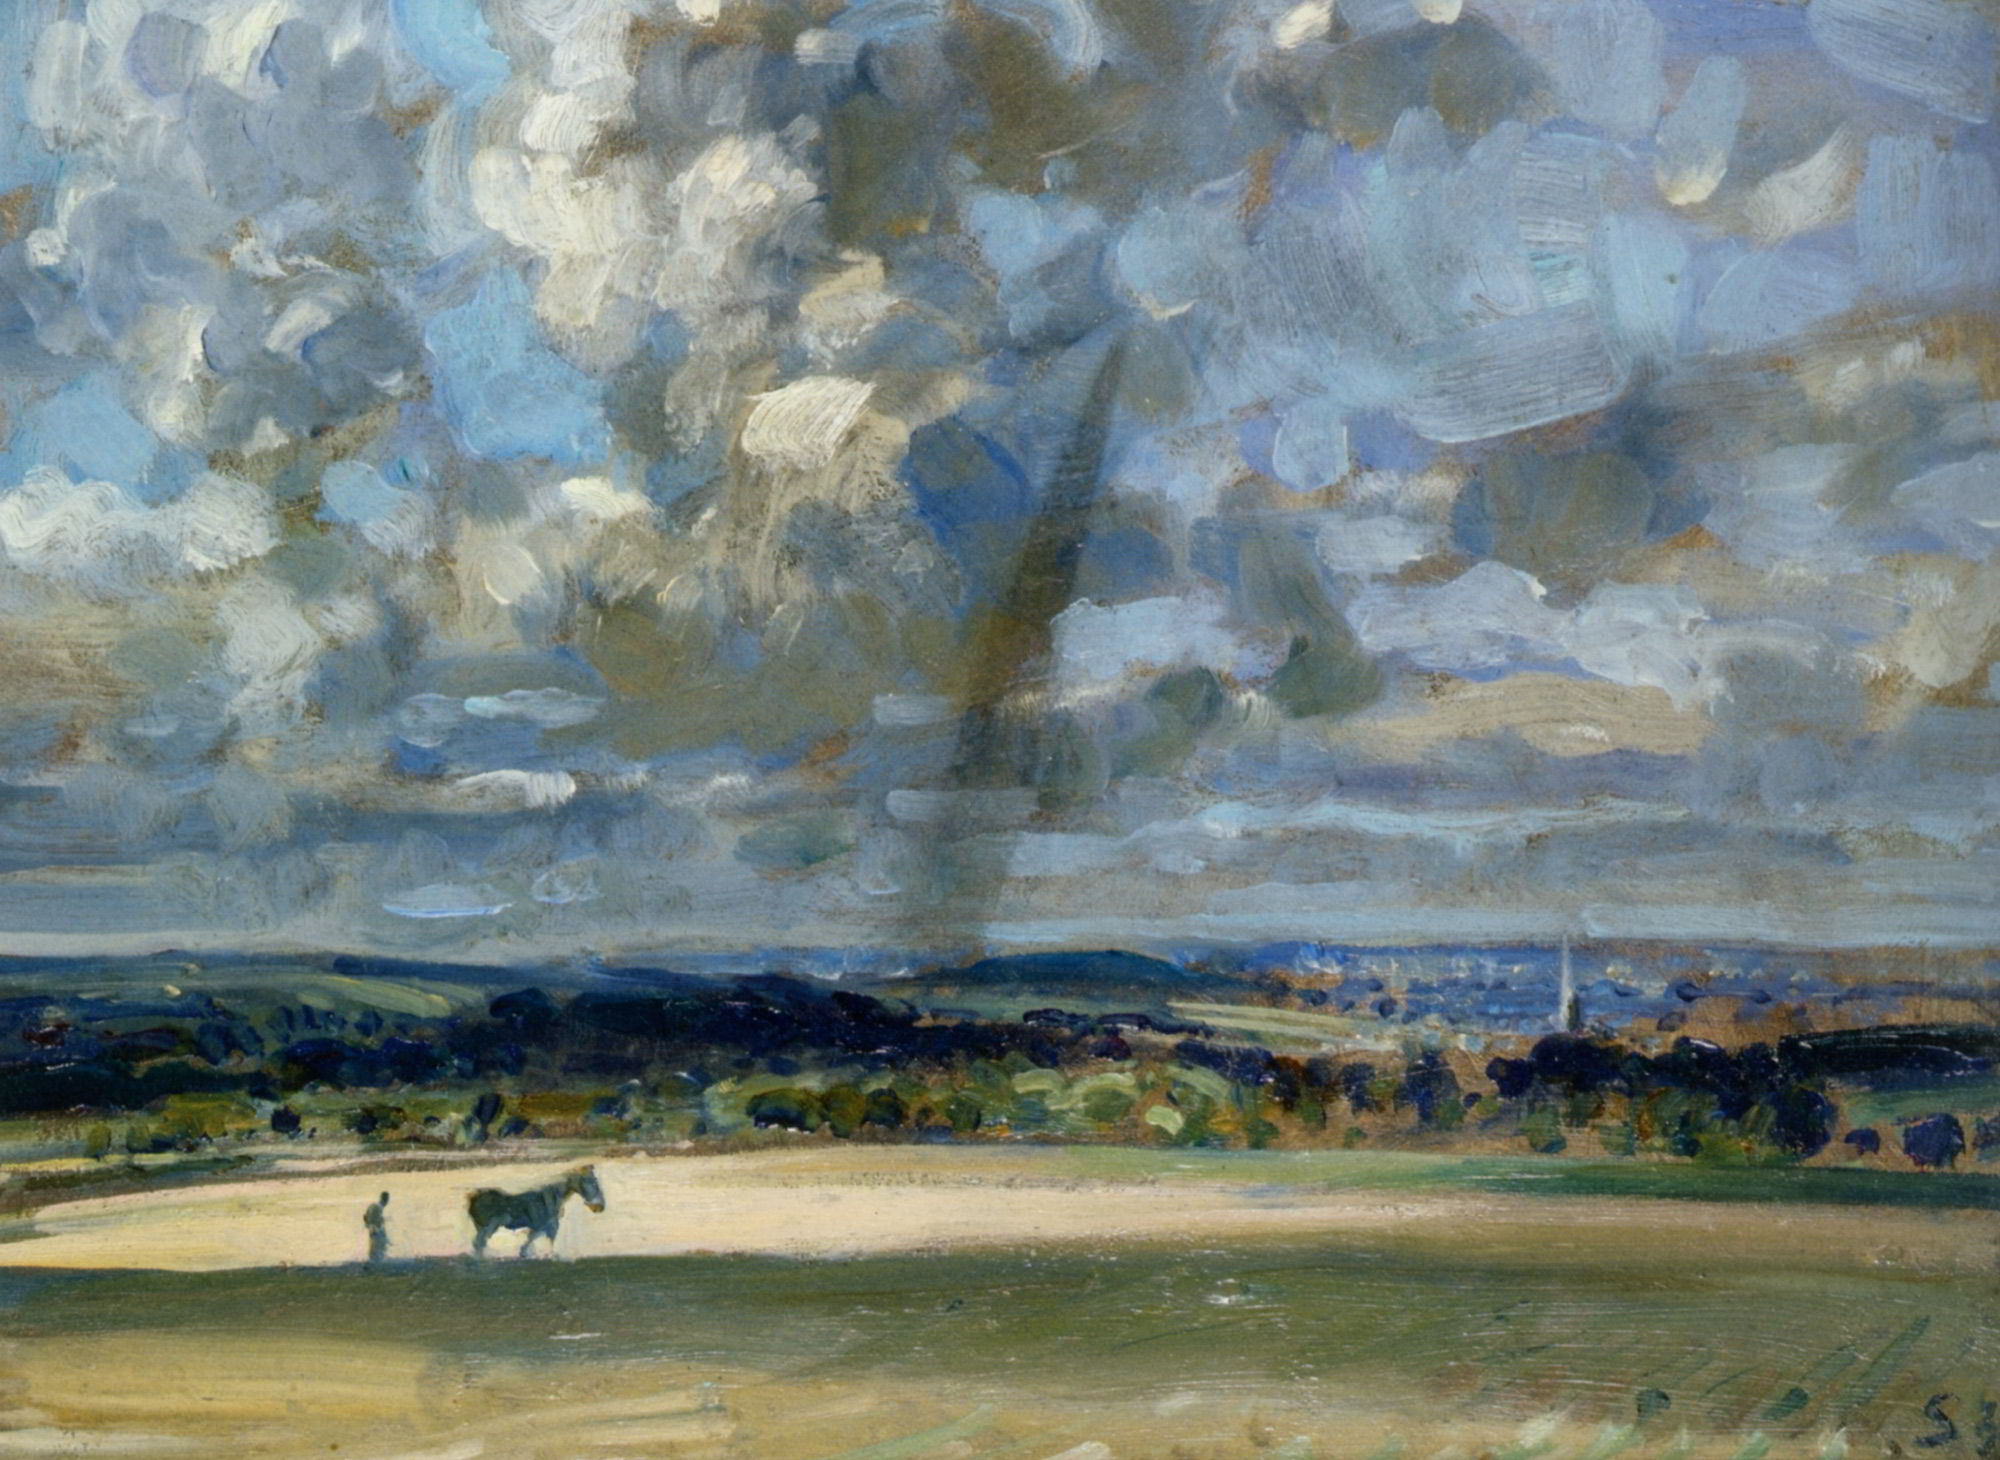 Ploughing the Furrow by Edward Seago	